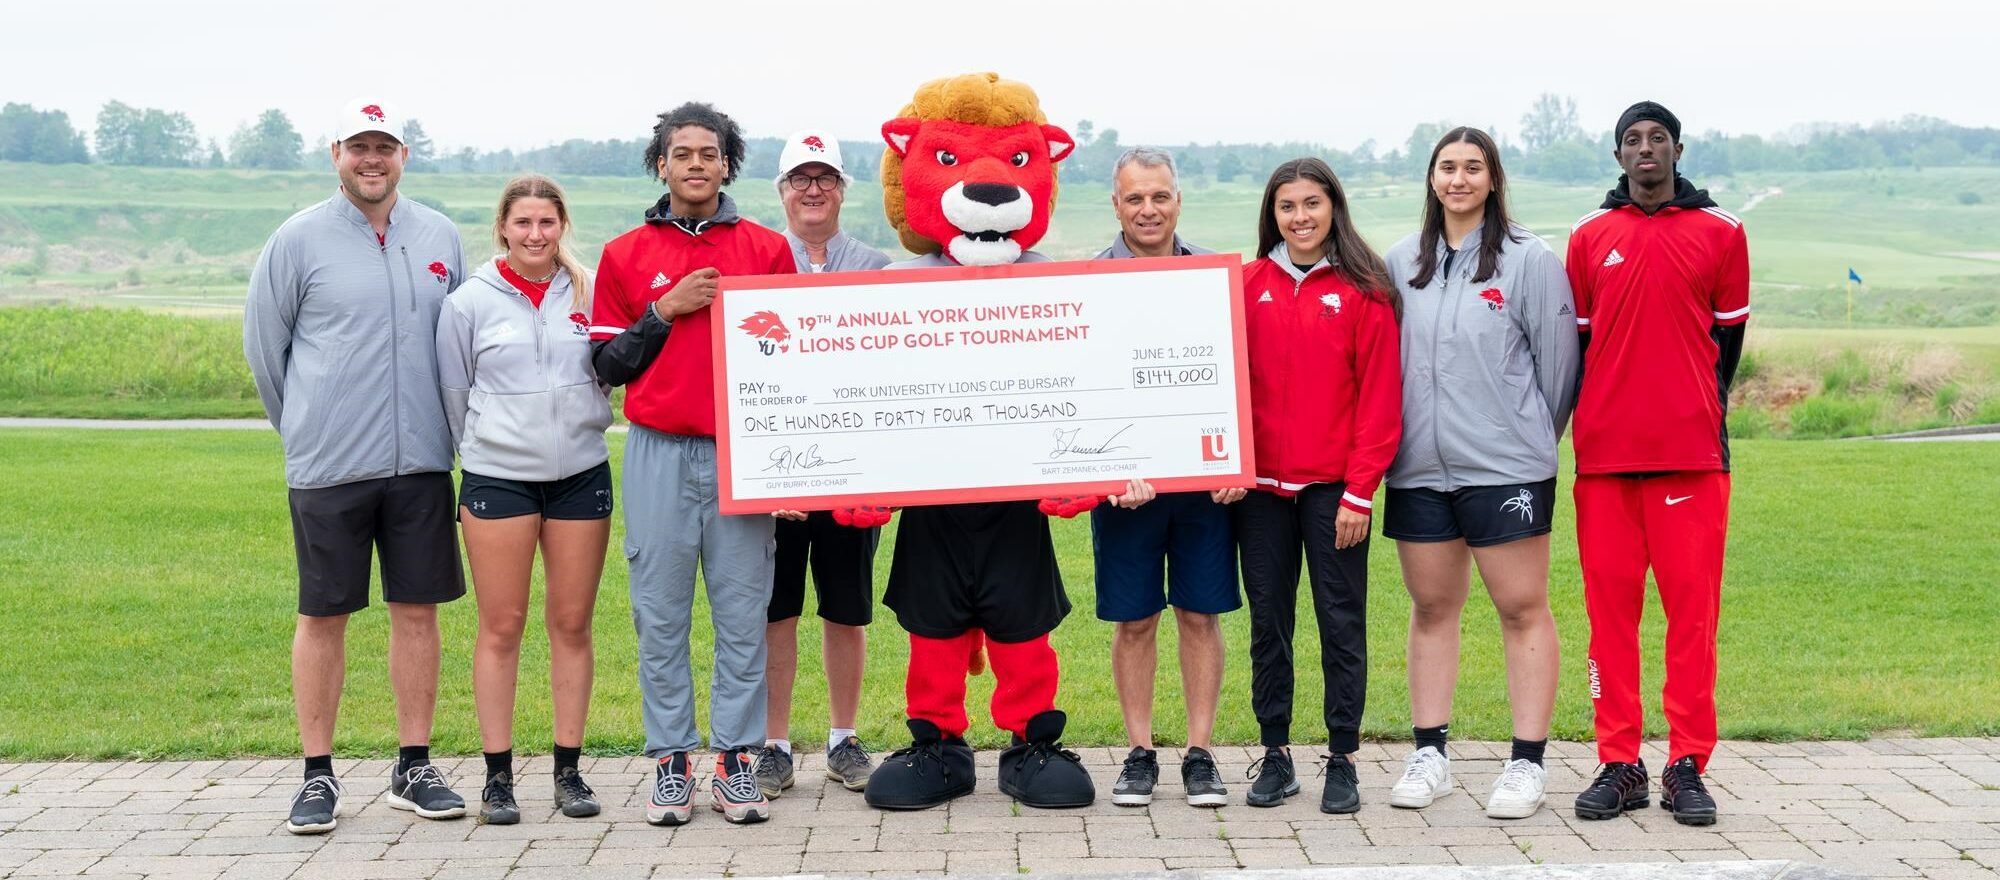 Lions mascot Yeo with dignitaries and student-athletes at the 19th annual Lions Cup golf tournament. From left: Bart Zemanek (associate director, advancement - Athletics & Recreation), Julia Cuccia (women's hockey player), Matthew Richards (track and field athlete), Guy Burry (co-chair, Lions Cup), Corrado Messina (senior relationship manager, Ontario Market Lead, TD Insurance), Lexy Anonech (women's hockey player), Alexis Grewal (women's basketball player), Abdullahi Abdullahi (track and field athlete)